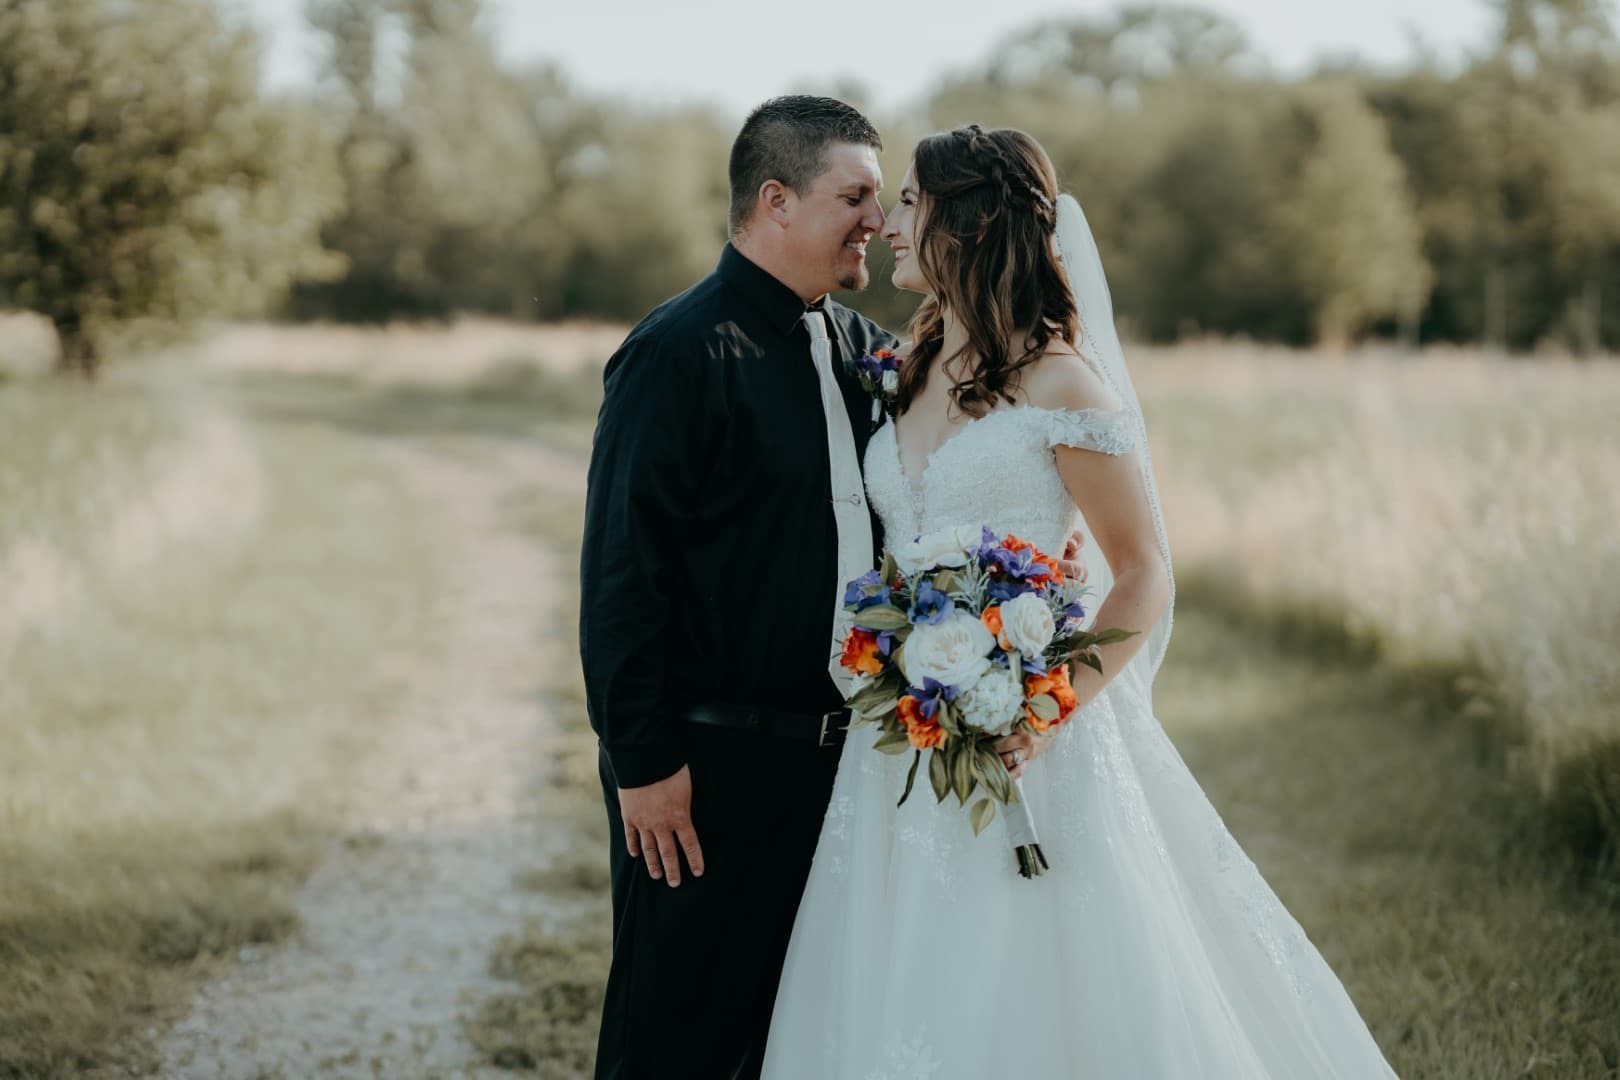 I filmed this couple's wedding and they wanted anniversary photos a year later.